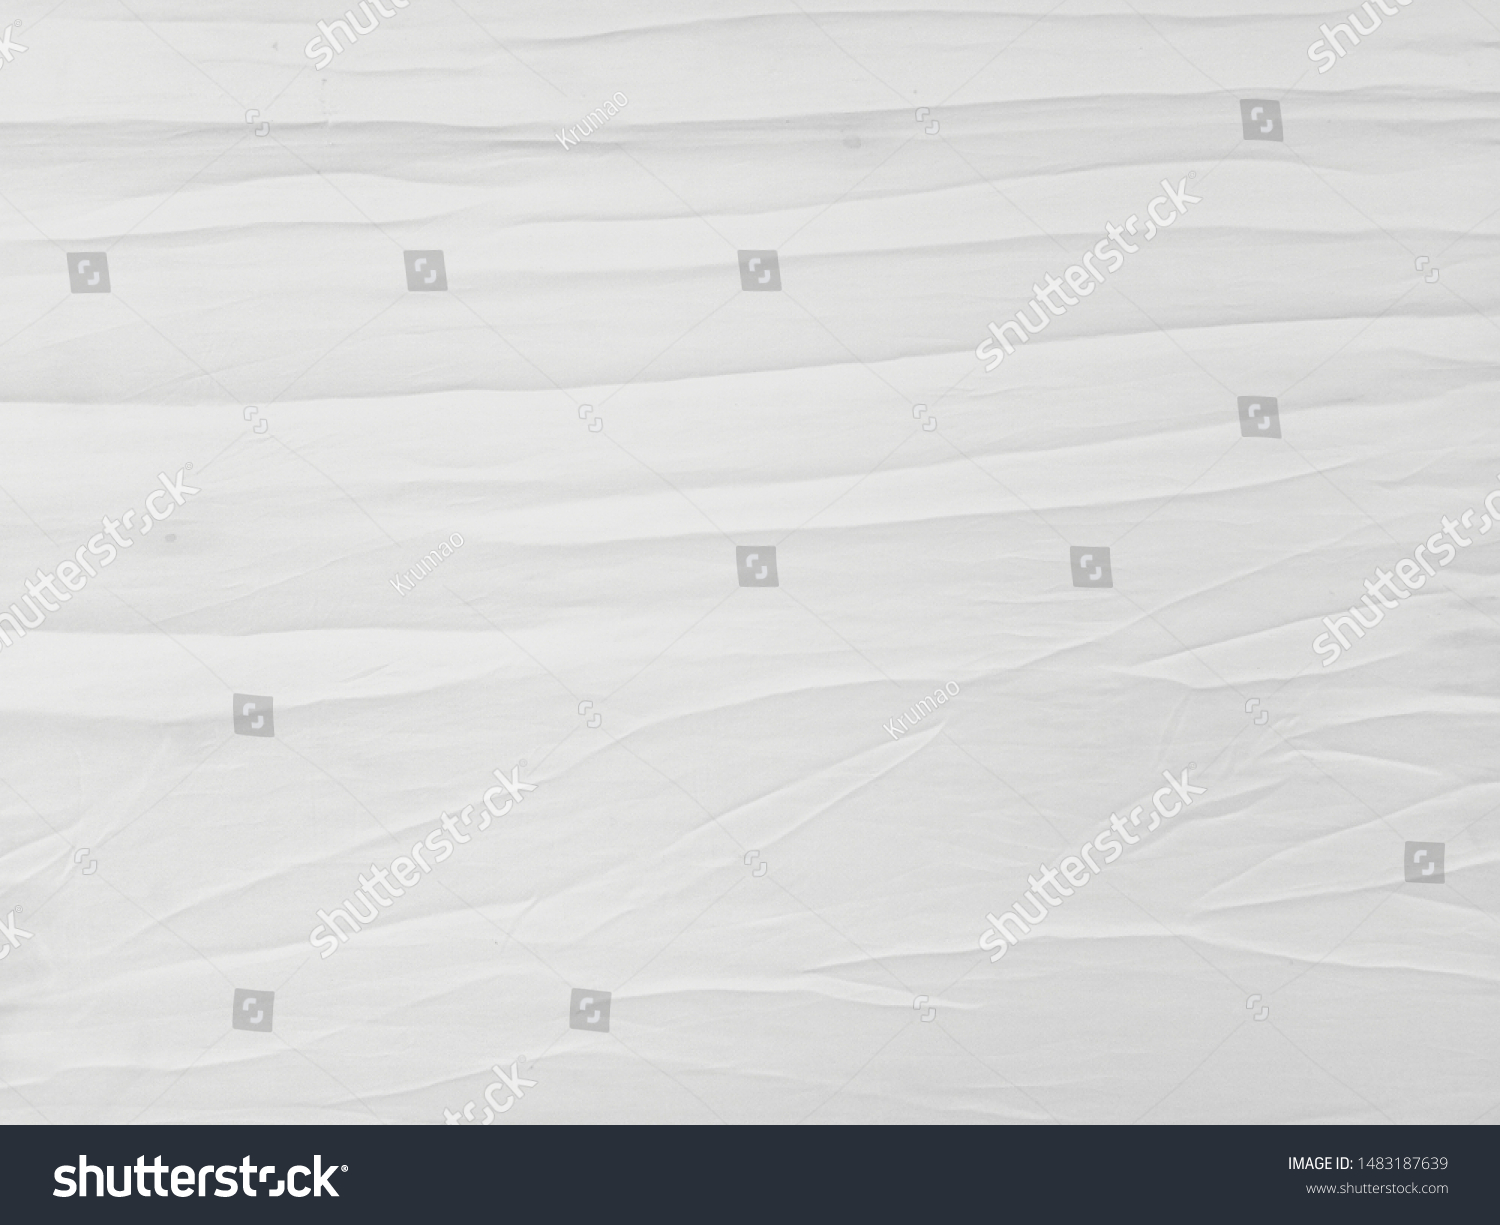 Soft white wrinkled fabric background for graphic design or wallpaper. #1483187639